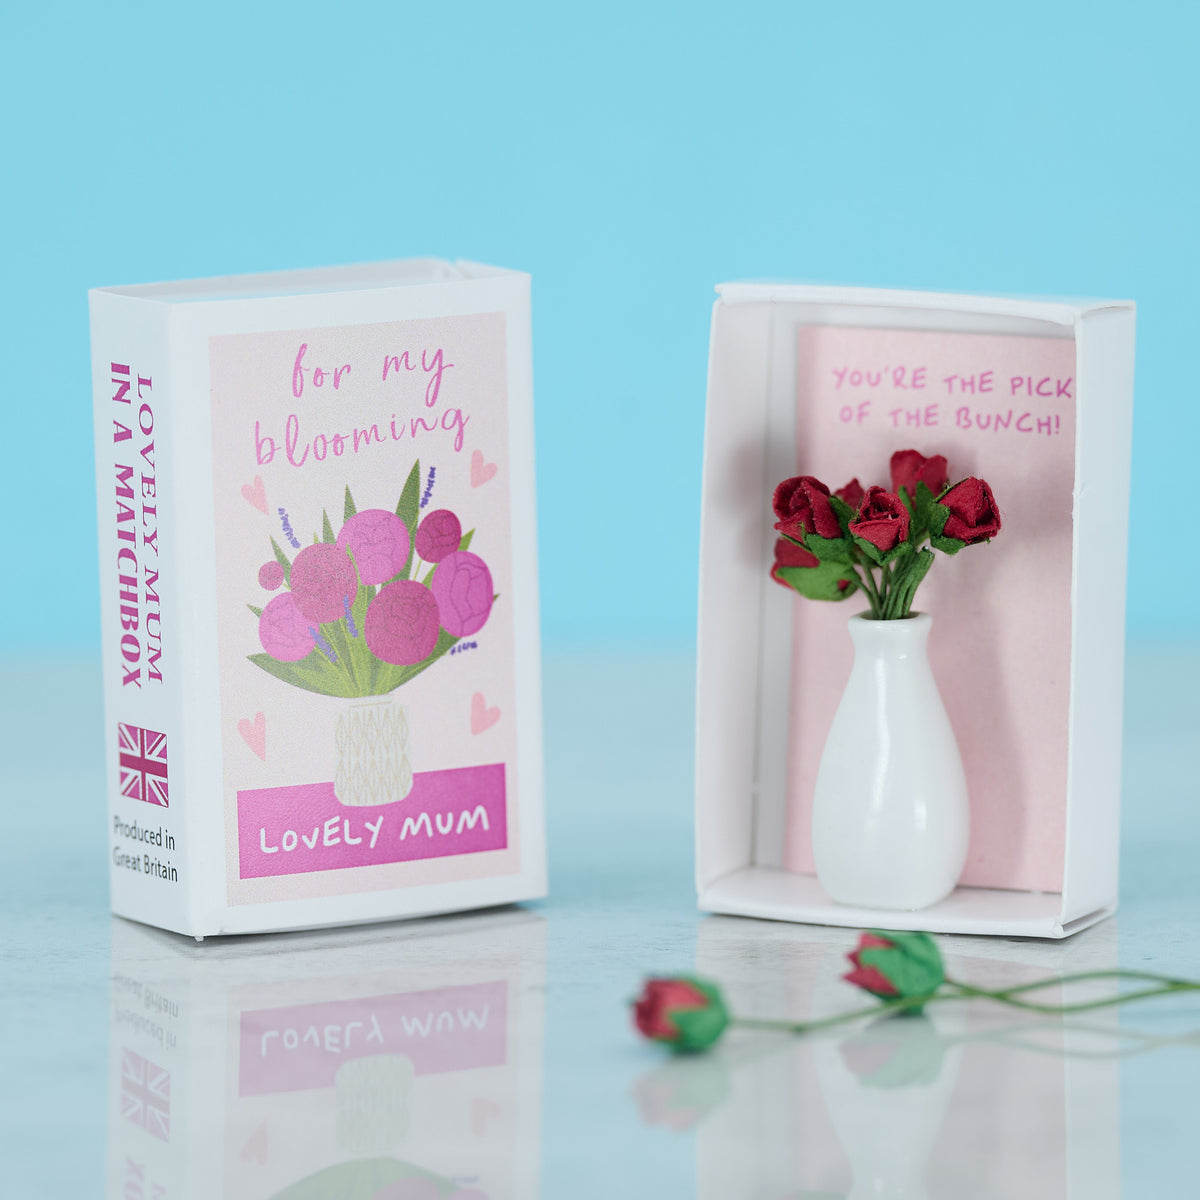 Blooming Lovely Mum Vase Of Roses In A Matchbox